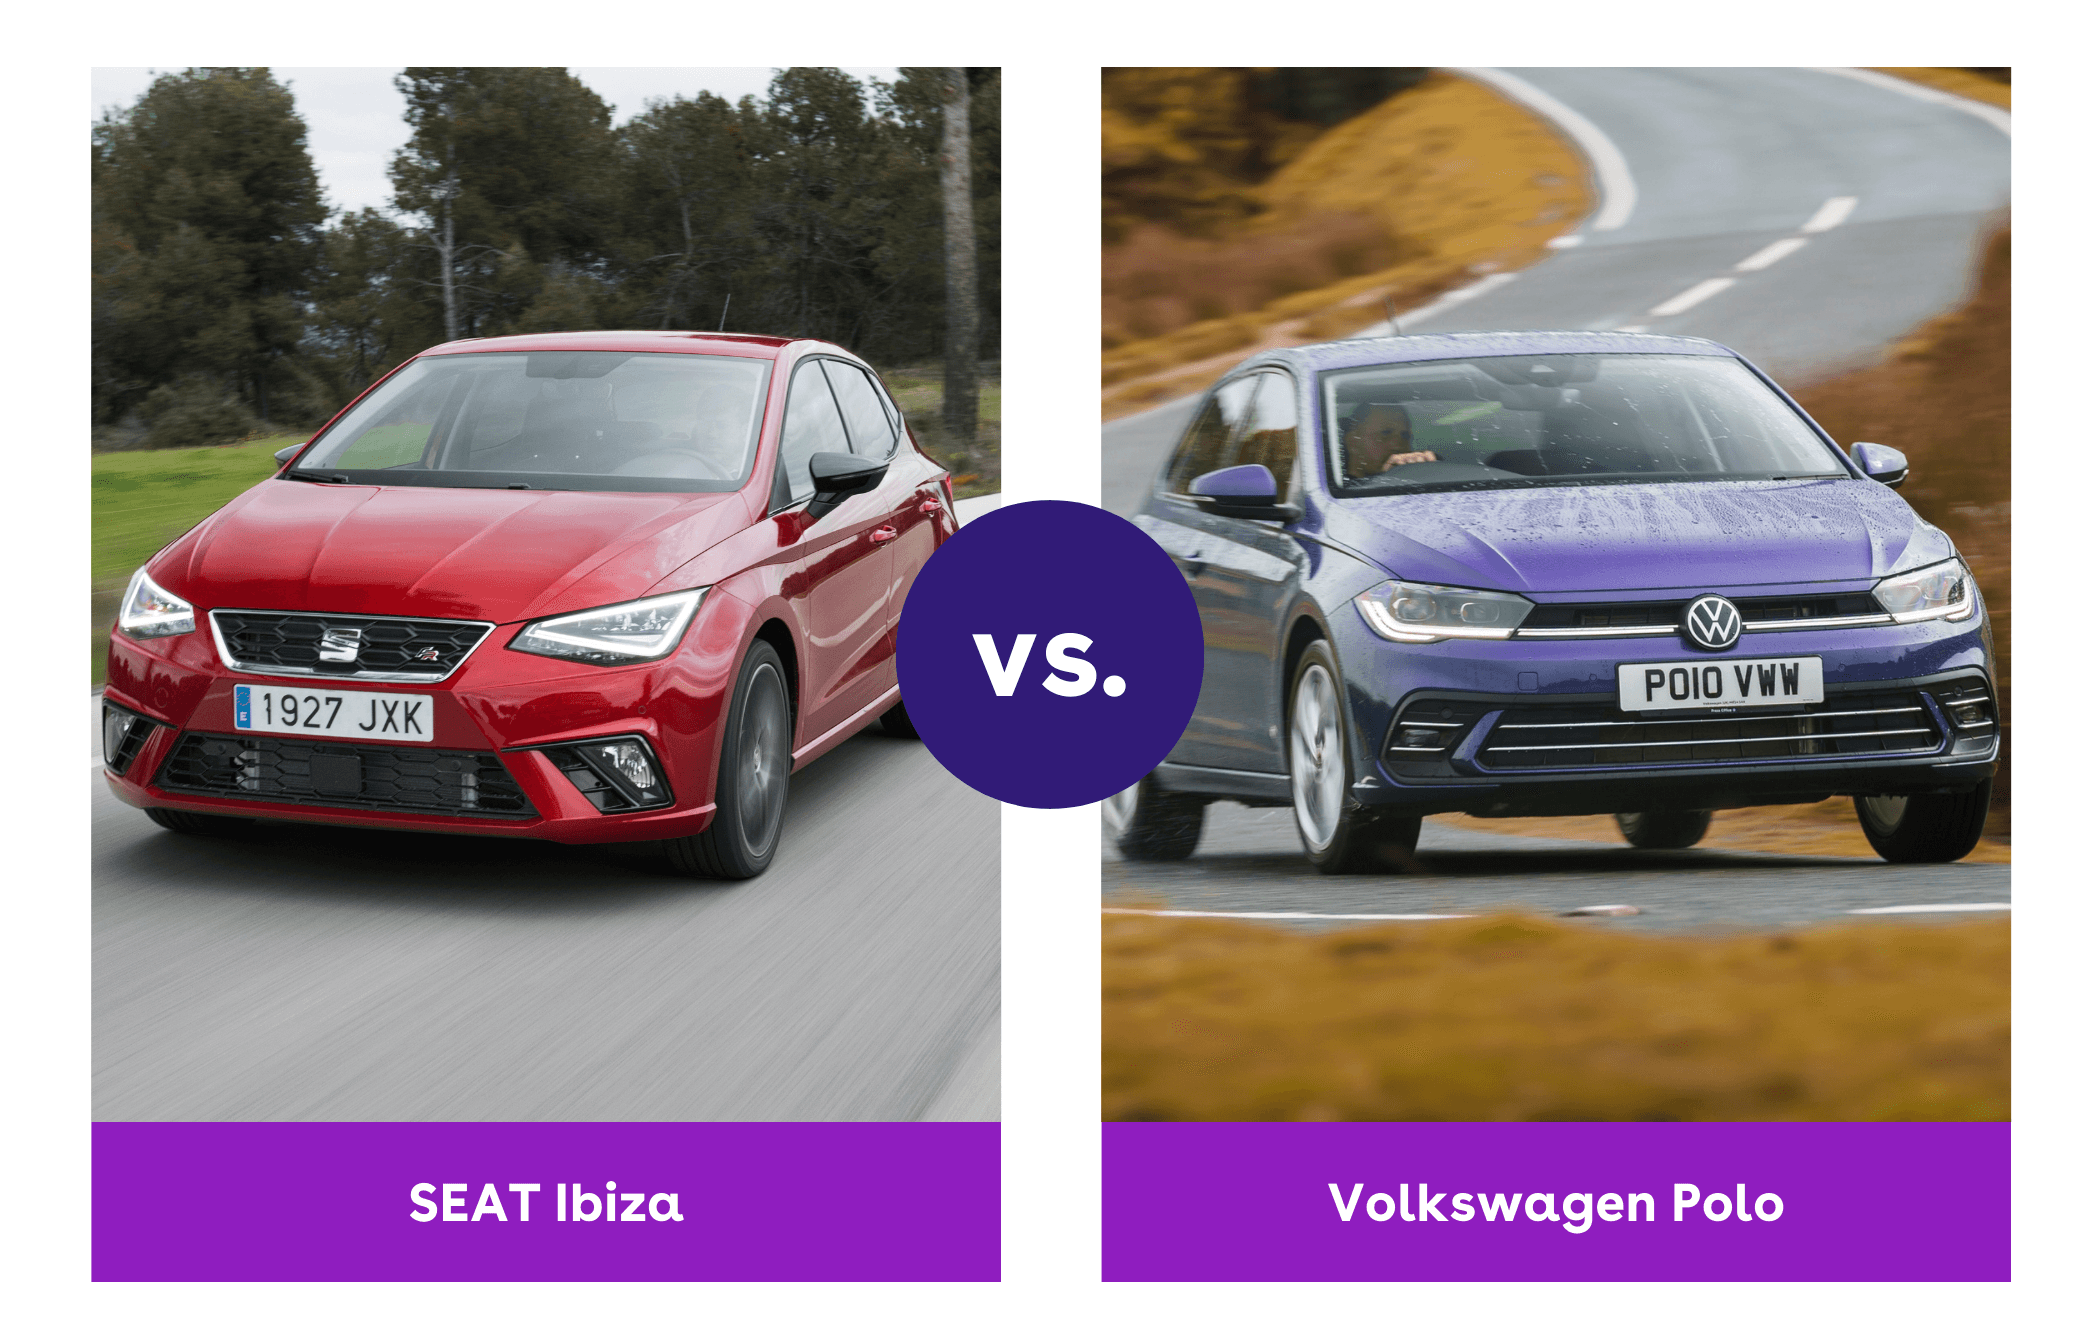 Side-by-side view of red SEAT Ibiza and purple Volkswagen Polo front